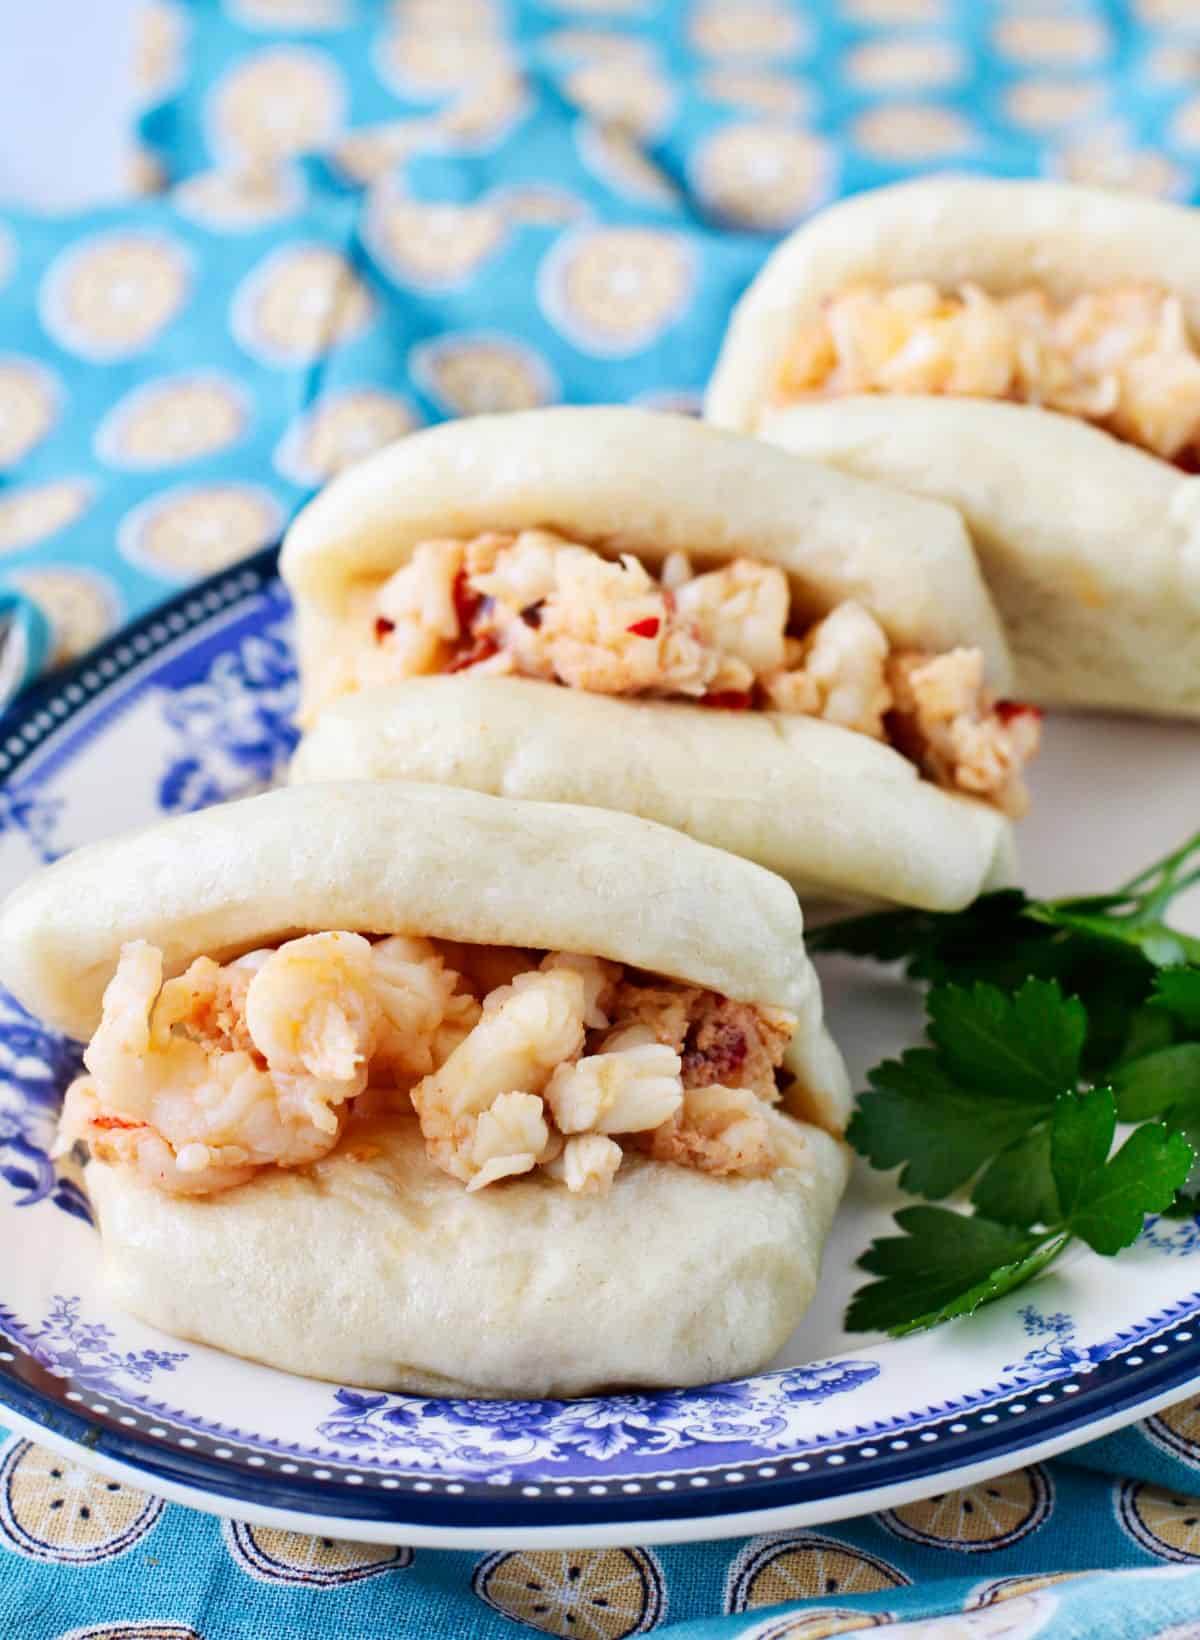 Spicy Lobster Bao lined up on a plate.